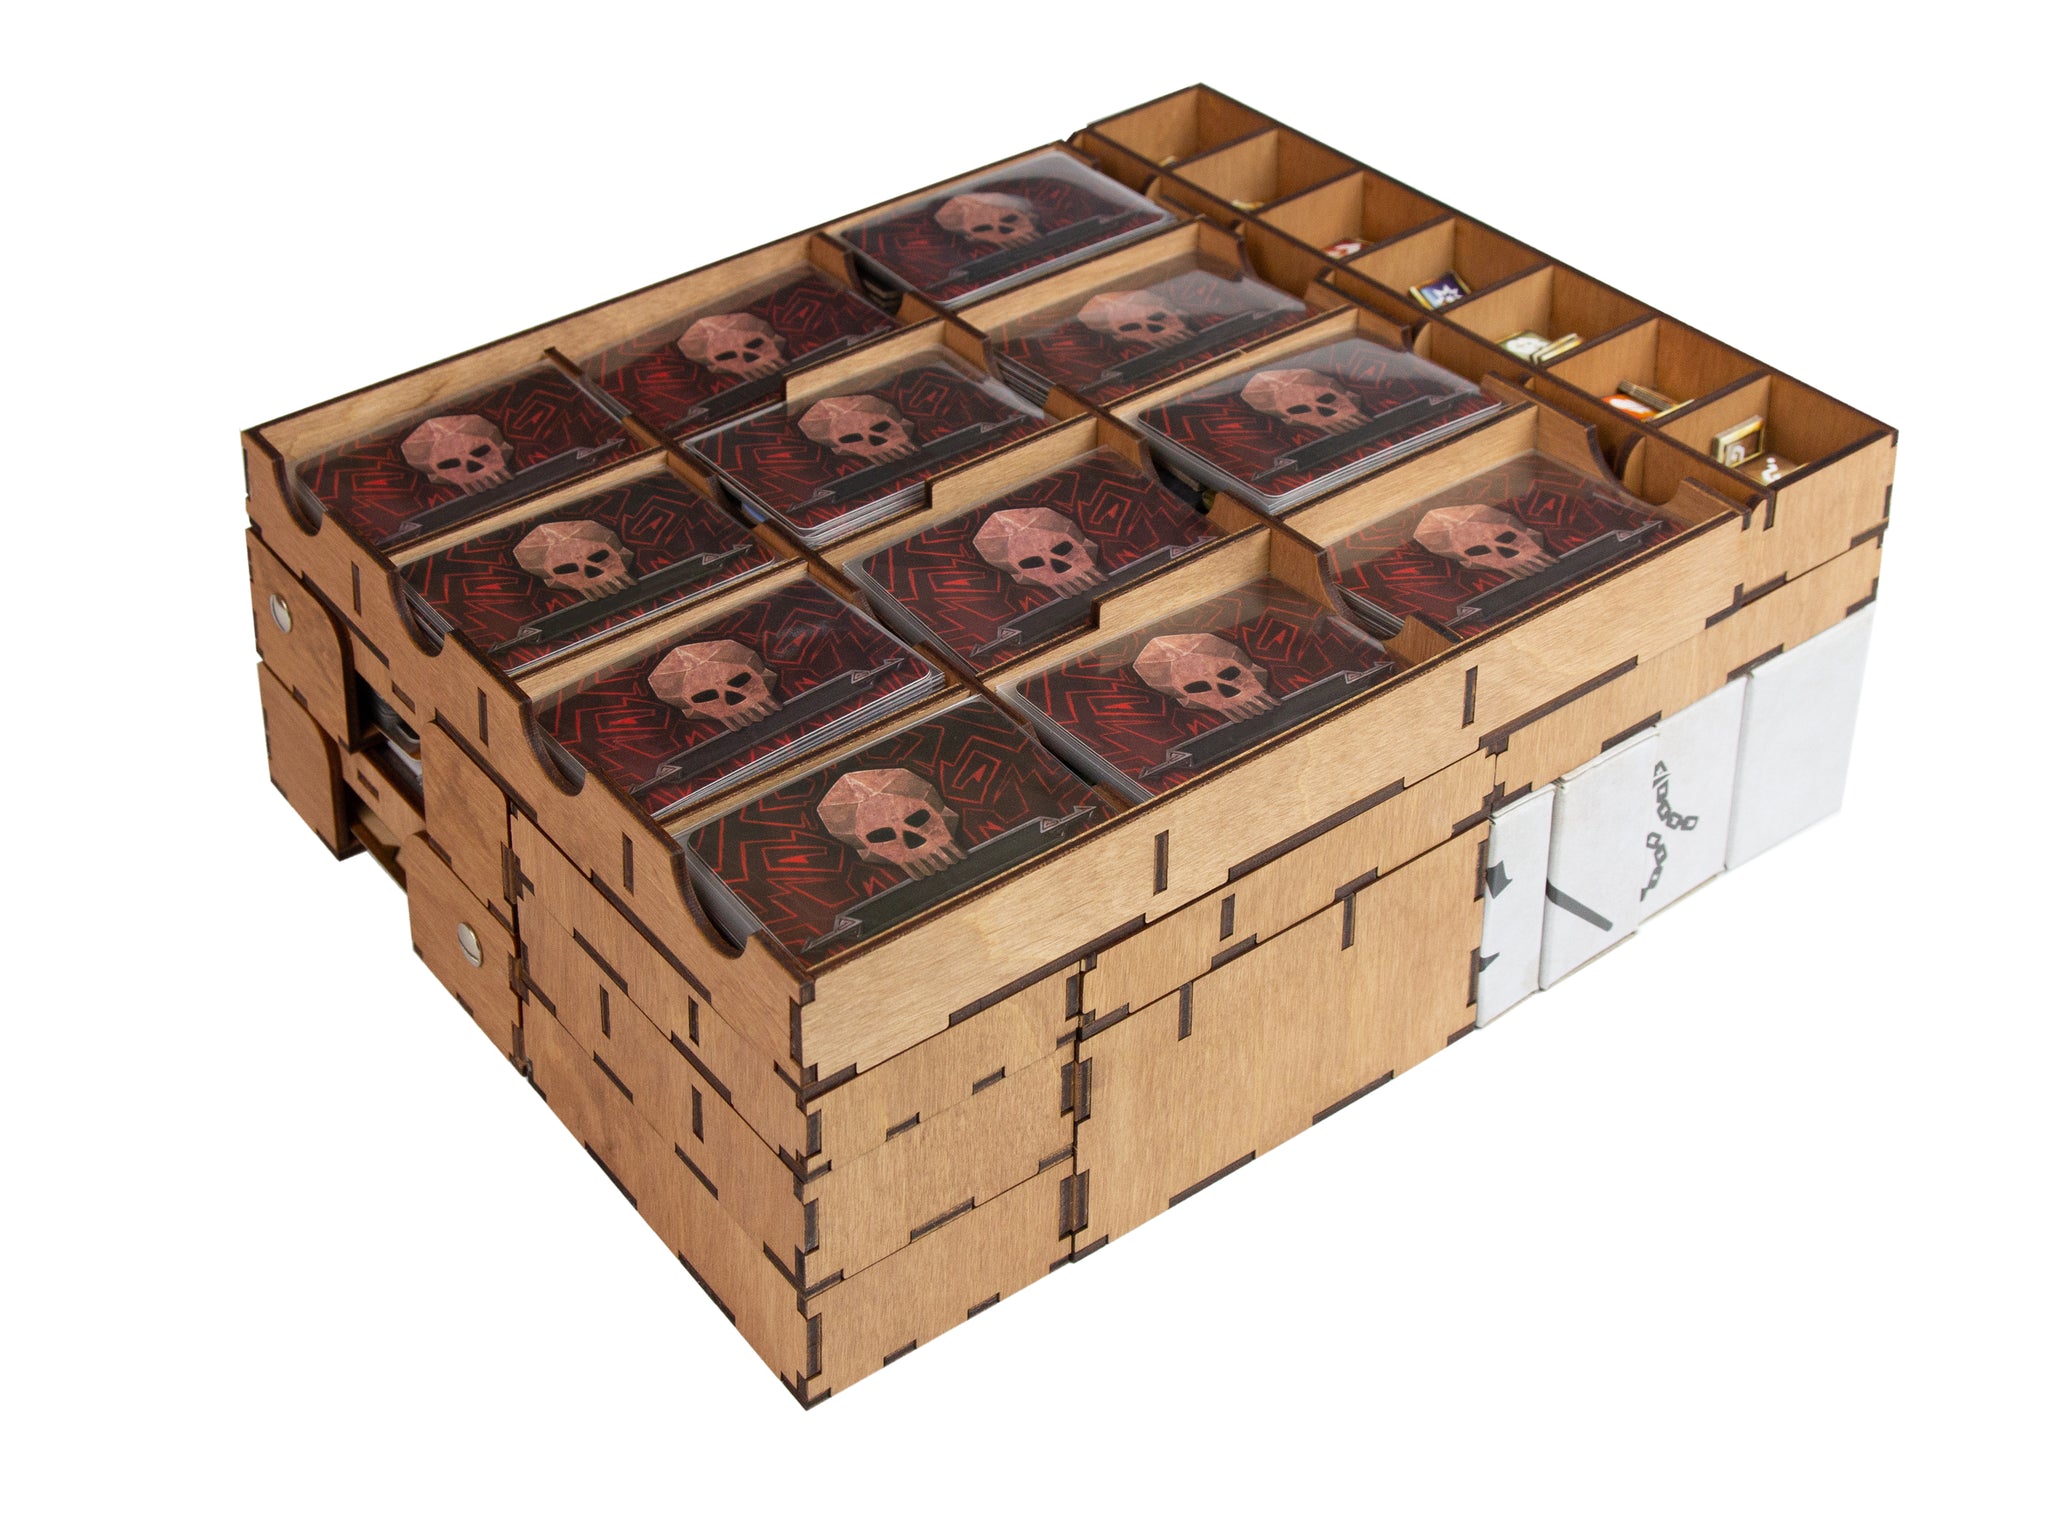 SMONEX Organizer Compatible with Gloomhaven Jaws of The Lion - Convenient Board Game Organizer Box with Four Player Trays